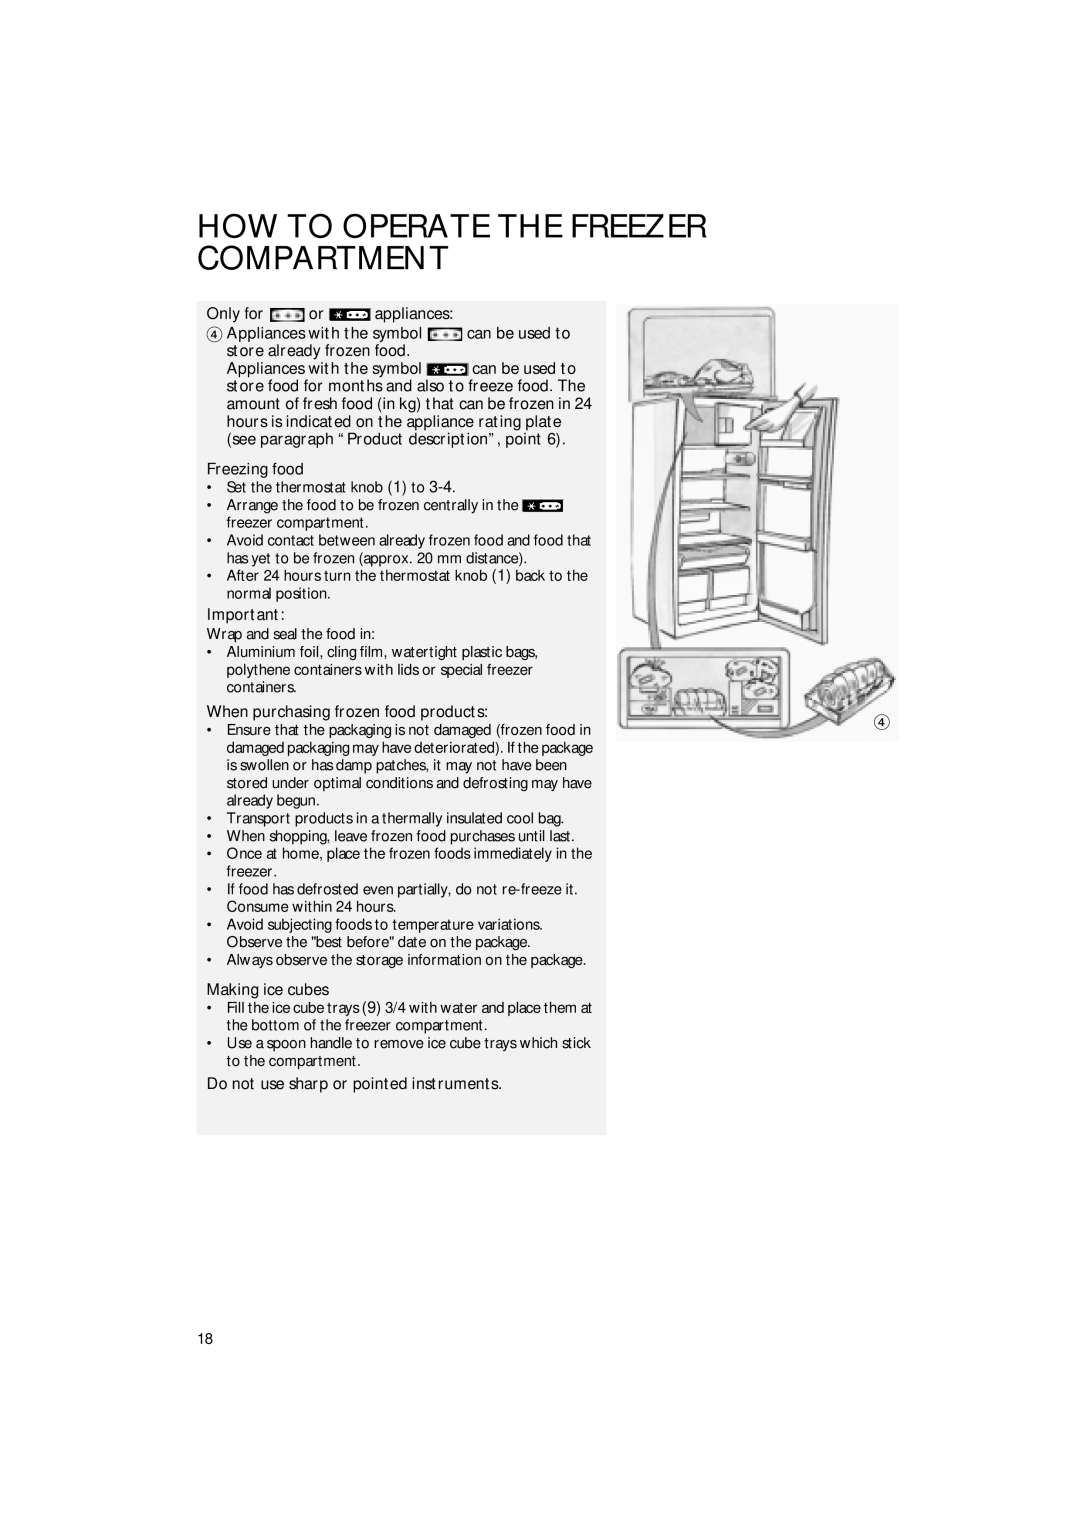 Smeg FR220A1 manual How To Operate The Freezer Compartment, Only for orappliances, Freezing food, Making ice cubes 